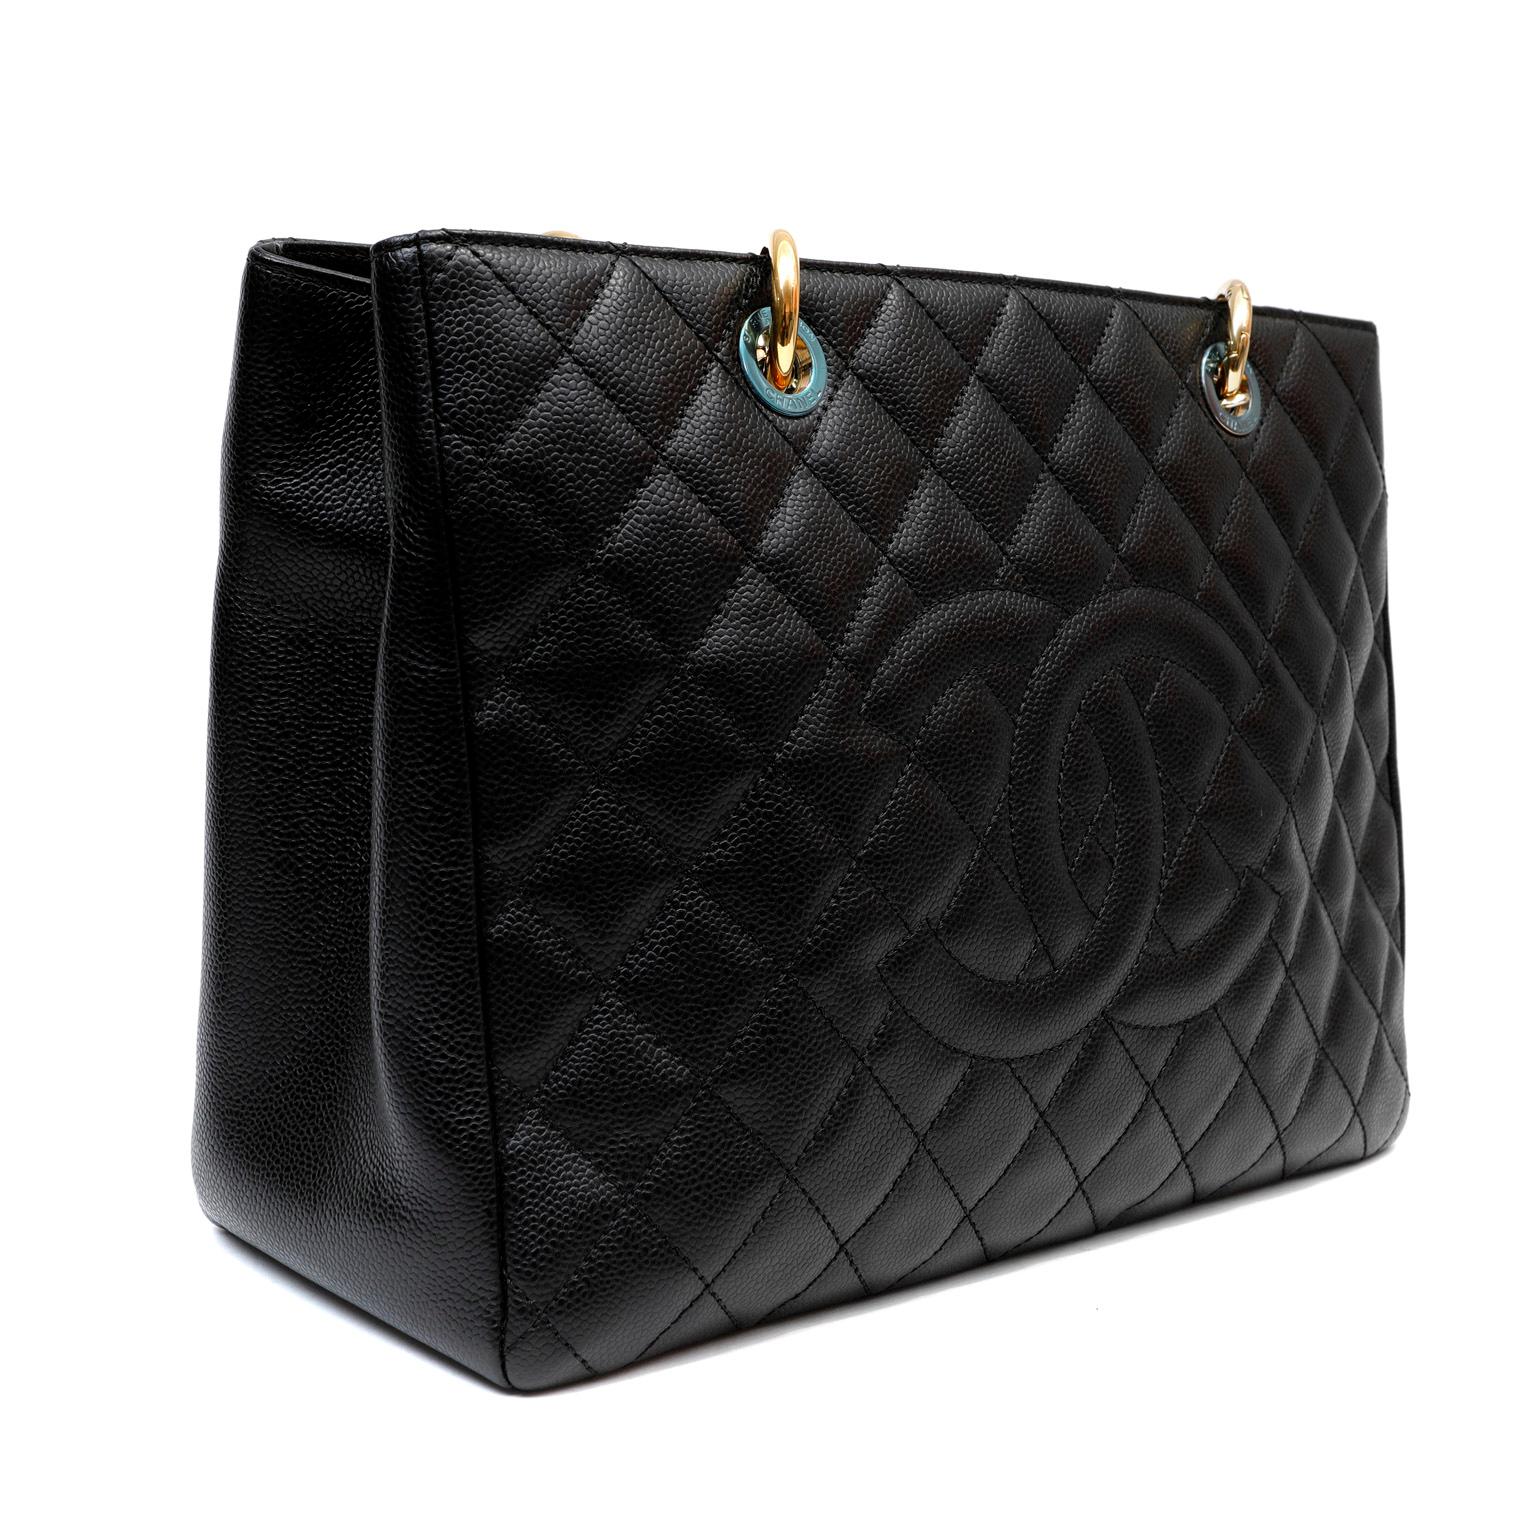 Women's Chanel Black Caviar GST with Gold Hardware